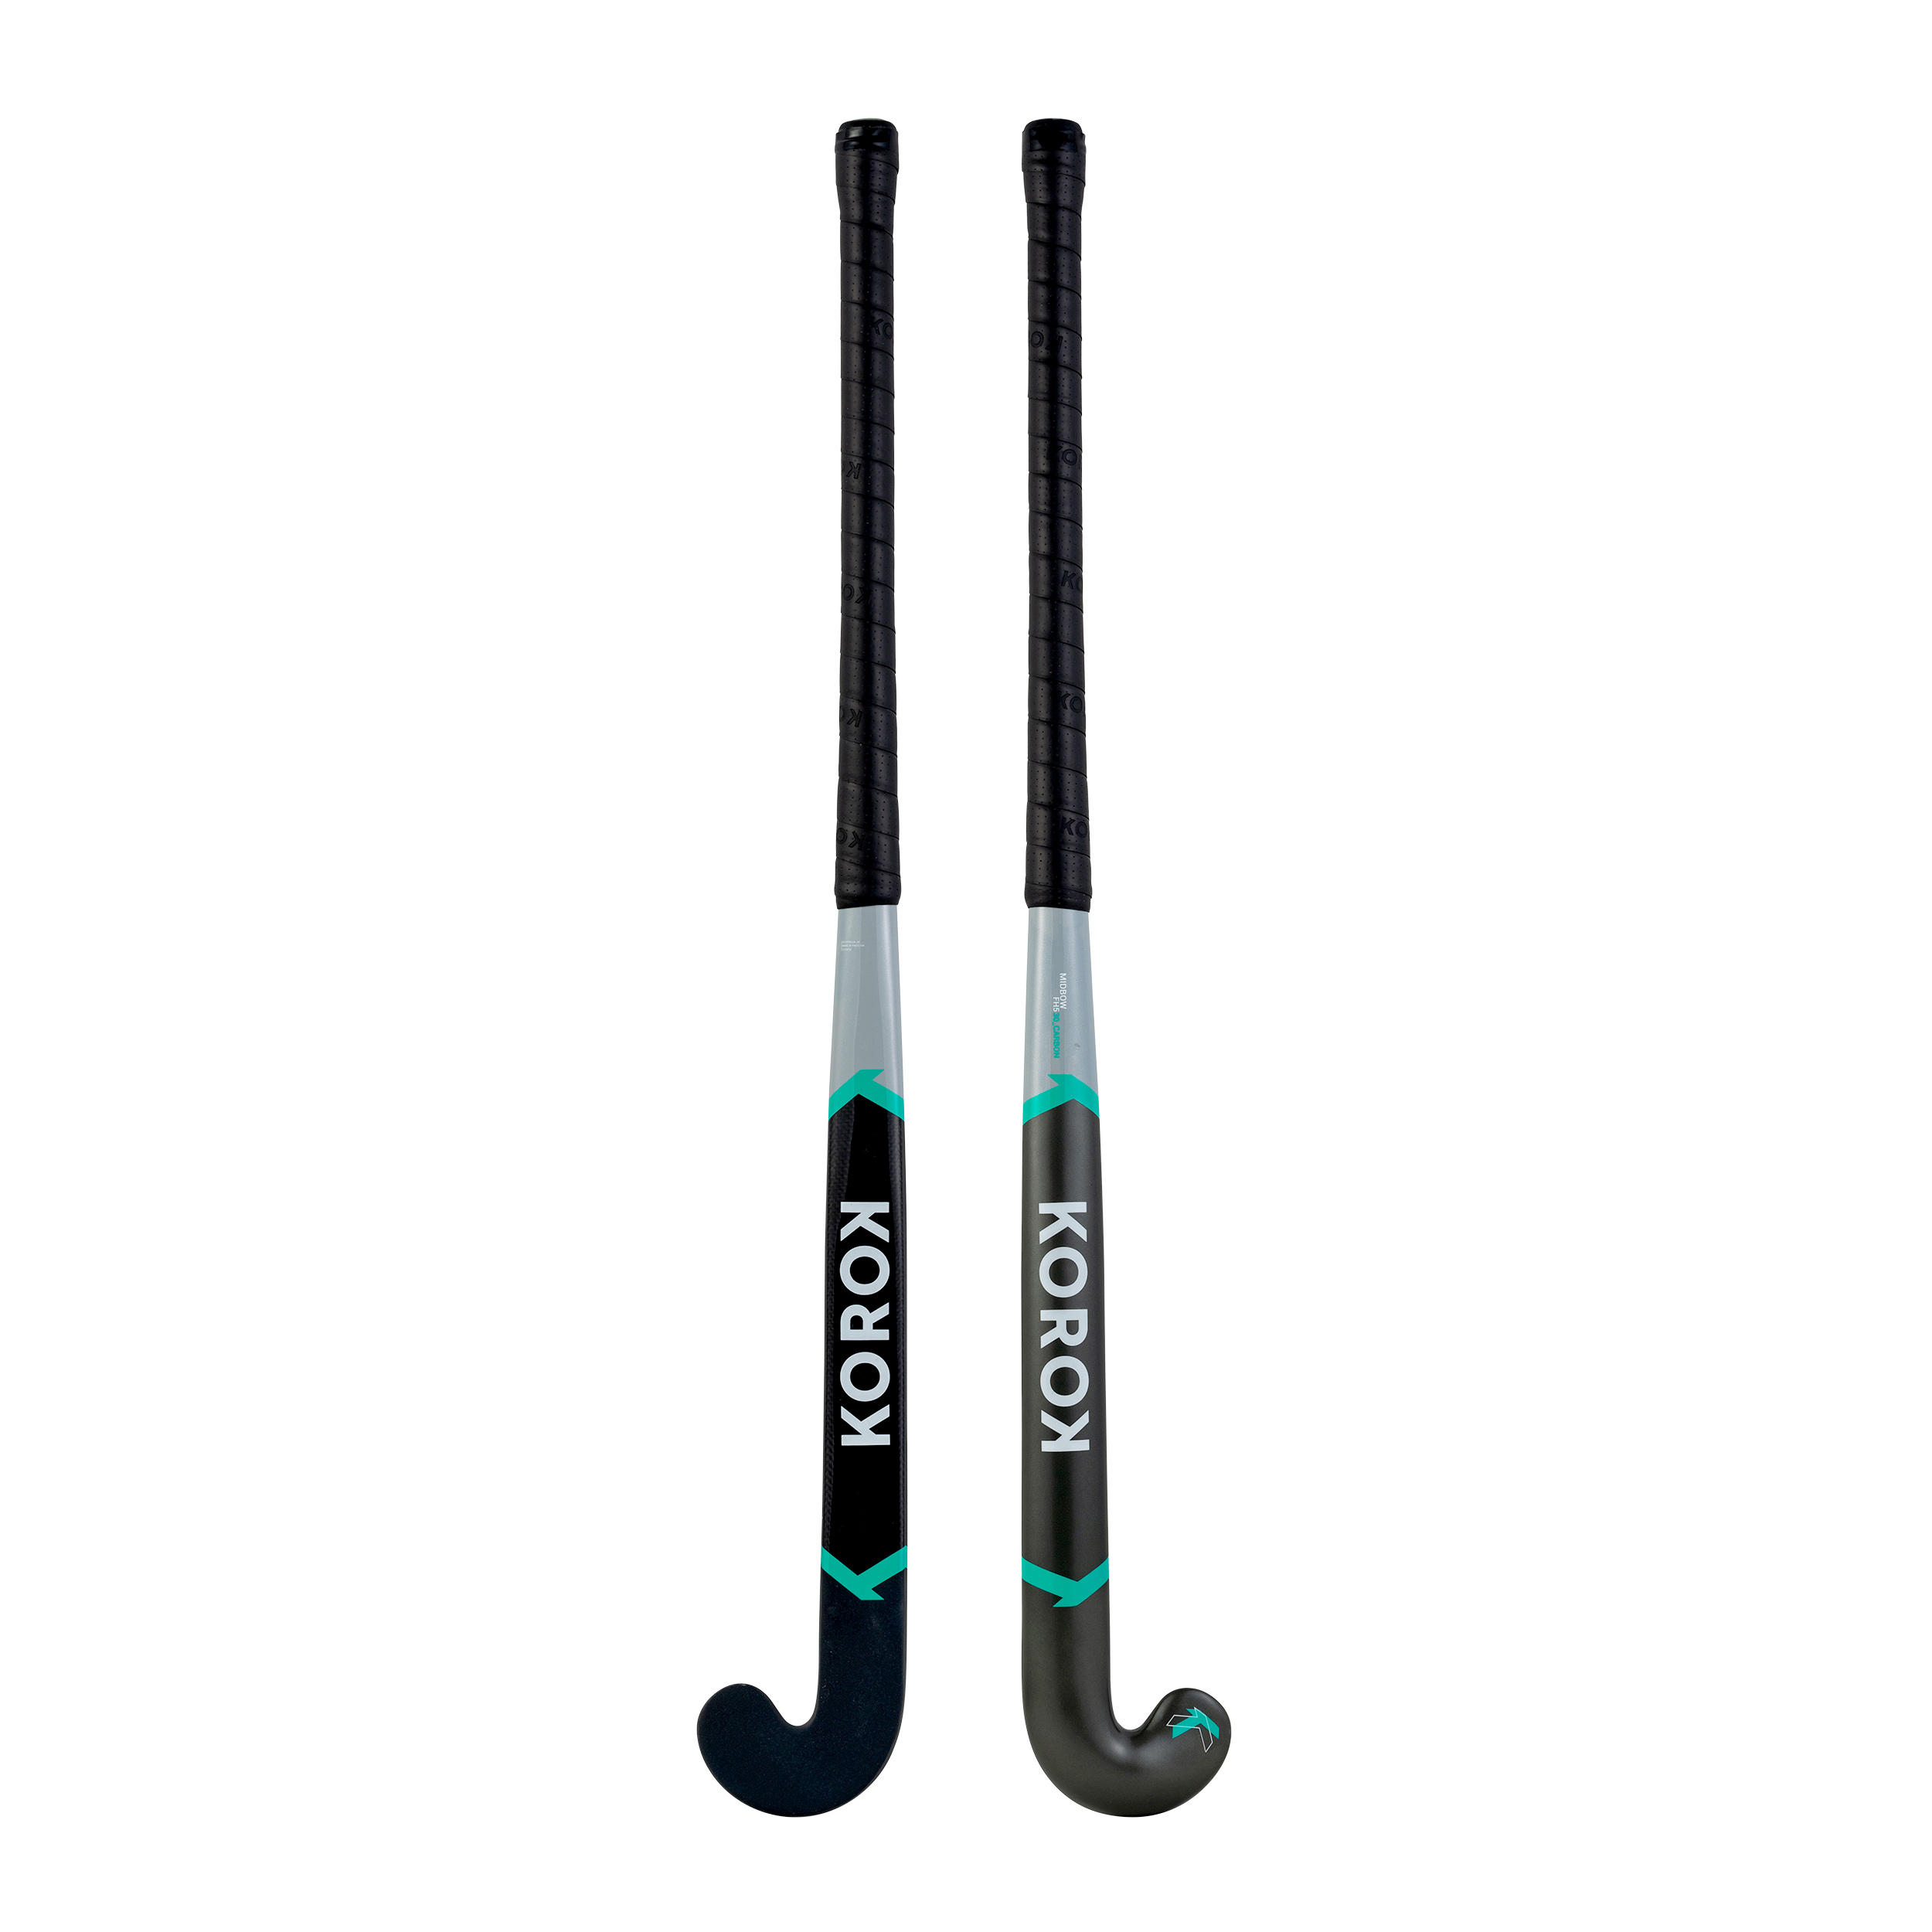 Adult Intermediate 30% Carbon Mid Bow Field Hockey Stick FH530 - Grey/Turquoise 6/12